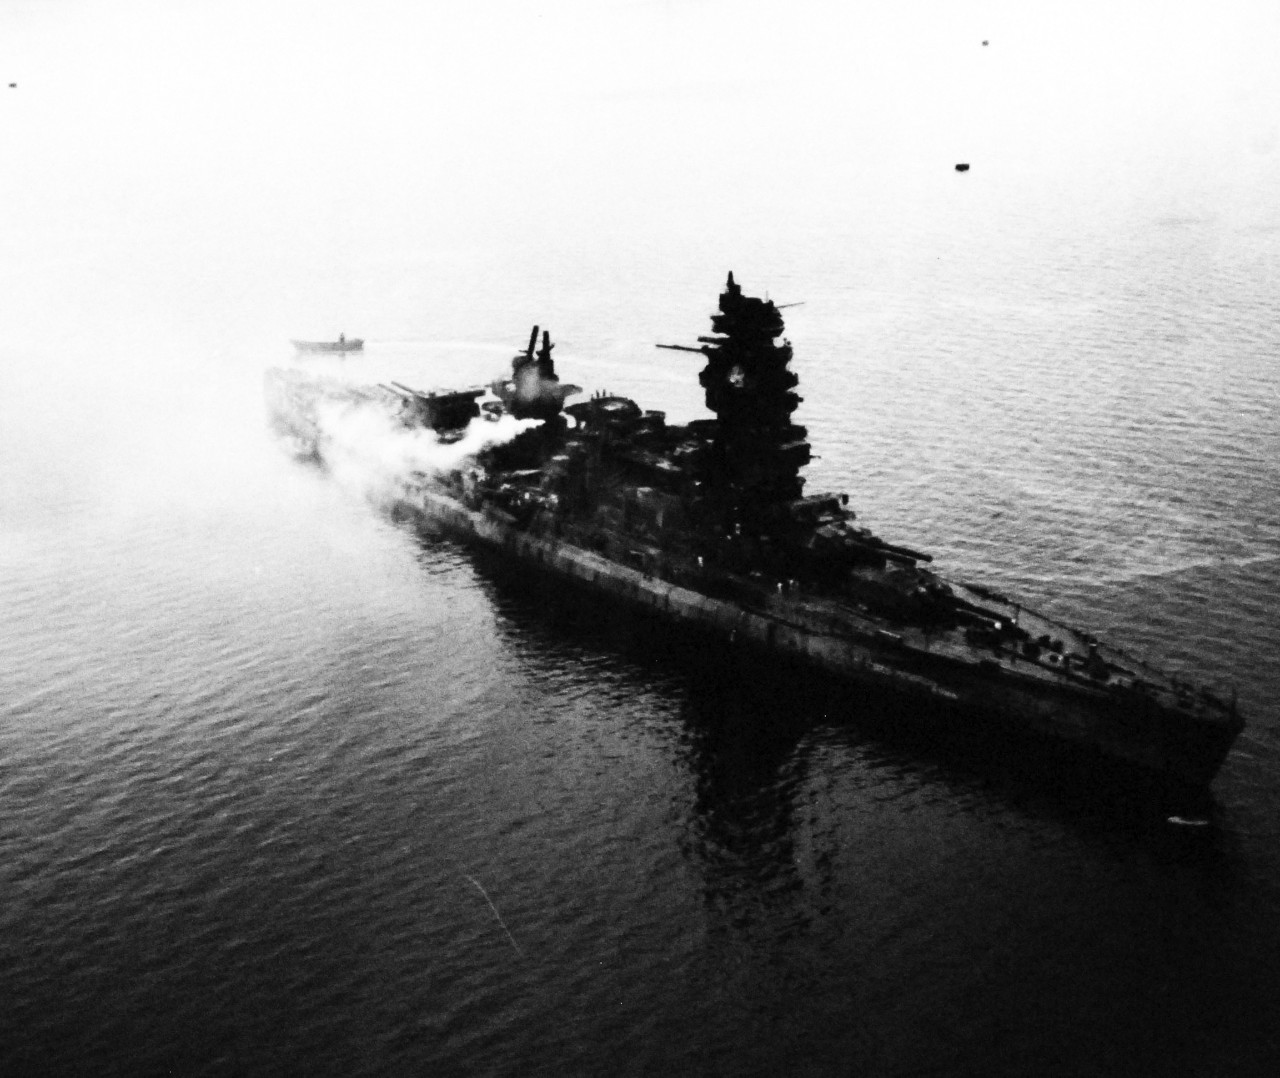 80-G-343774:   Japanese battleship Nagato, 1945.      The badly damaged Japanese battleship Nagato off Yokosuka Naval Air Station, Japan, as seen from plane of USS Shangri La (CV-38).    Photographed by Photographer’s Mate Second Class J. Guttoach, August 26, 1945.   Official U.S. Navy Photograph, now in the collections of the U.S. National Archives.   (2014/5/22). 